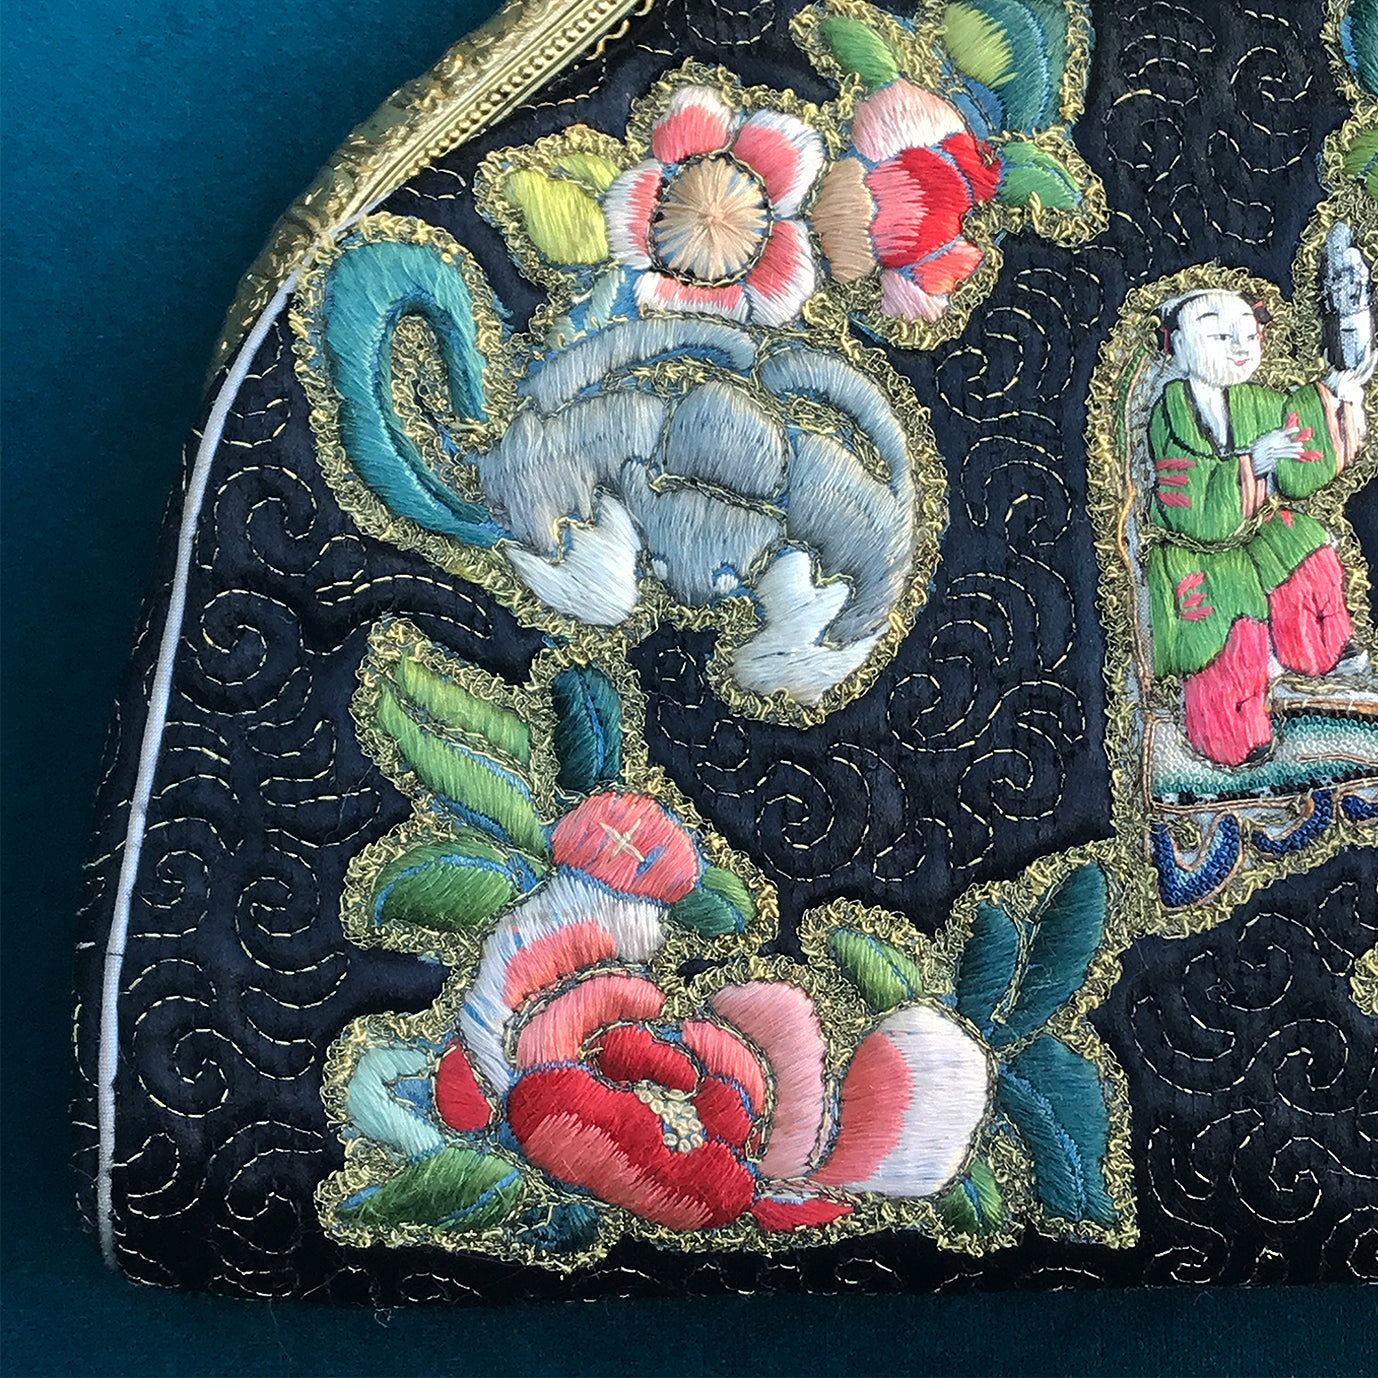 Exquisitely embroidered Vintage Chinese Silk Handbag with golden clasp in the most amazing original condition. The main body of the black bag is hand embroidered with a central silk Chinese figure surrounded by stylised embroidered silk dragons and flowers. It comes with its original silk purse and silk and kid leather lined mirror - SHOP NOW - www.intovintage.co.uk